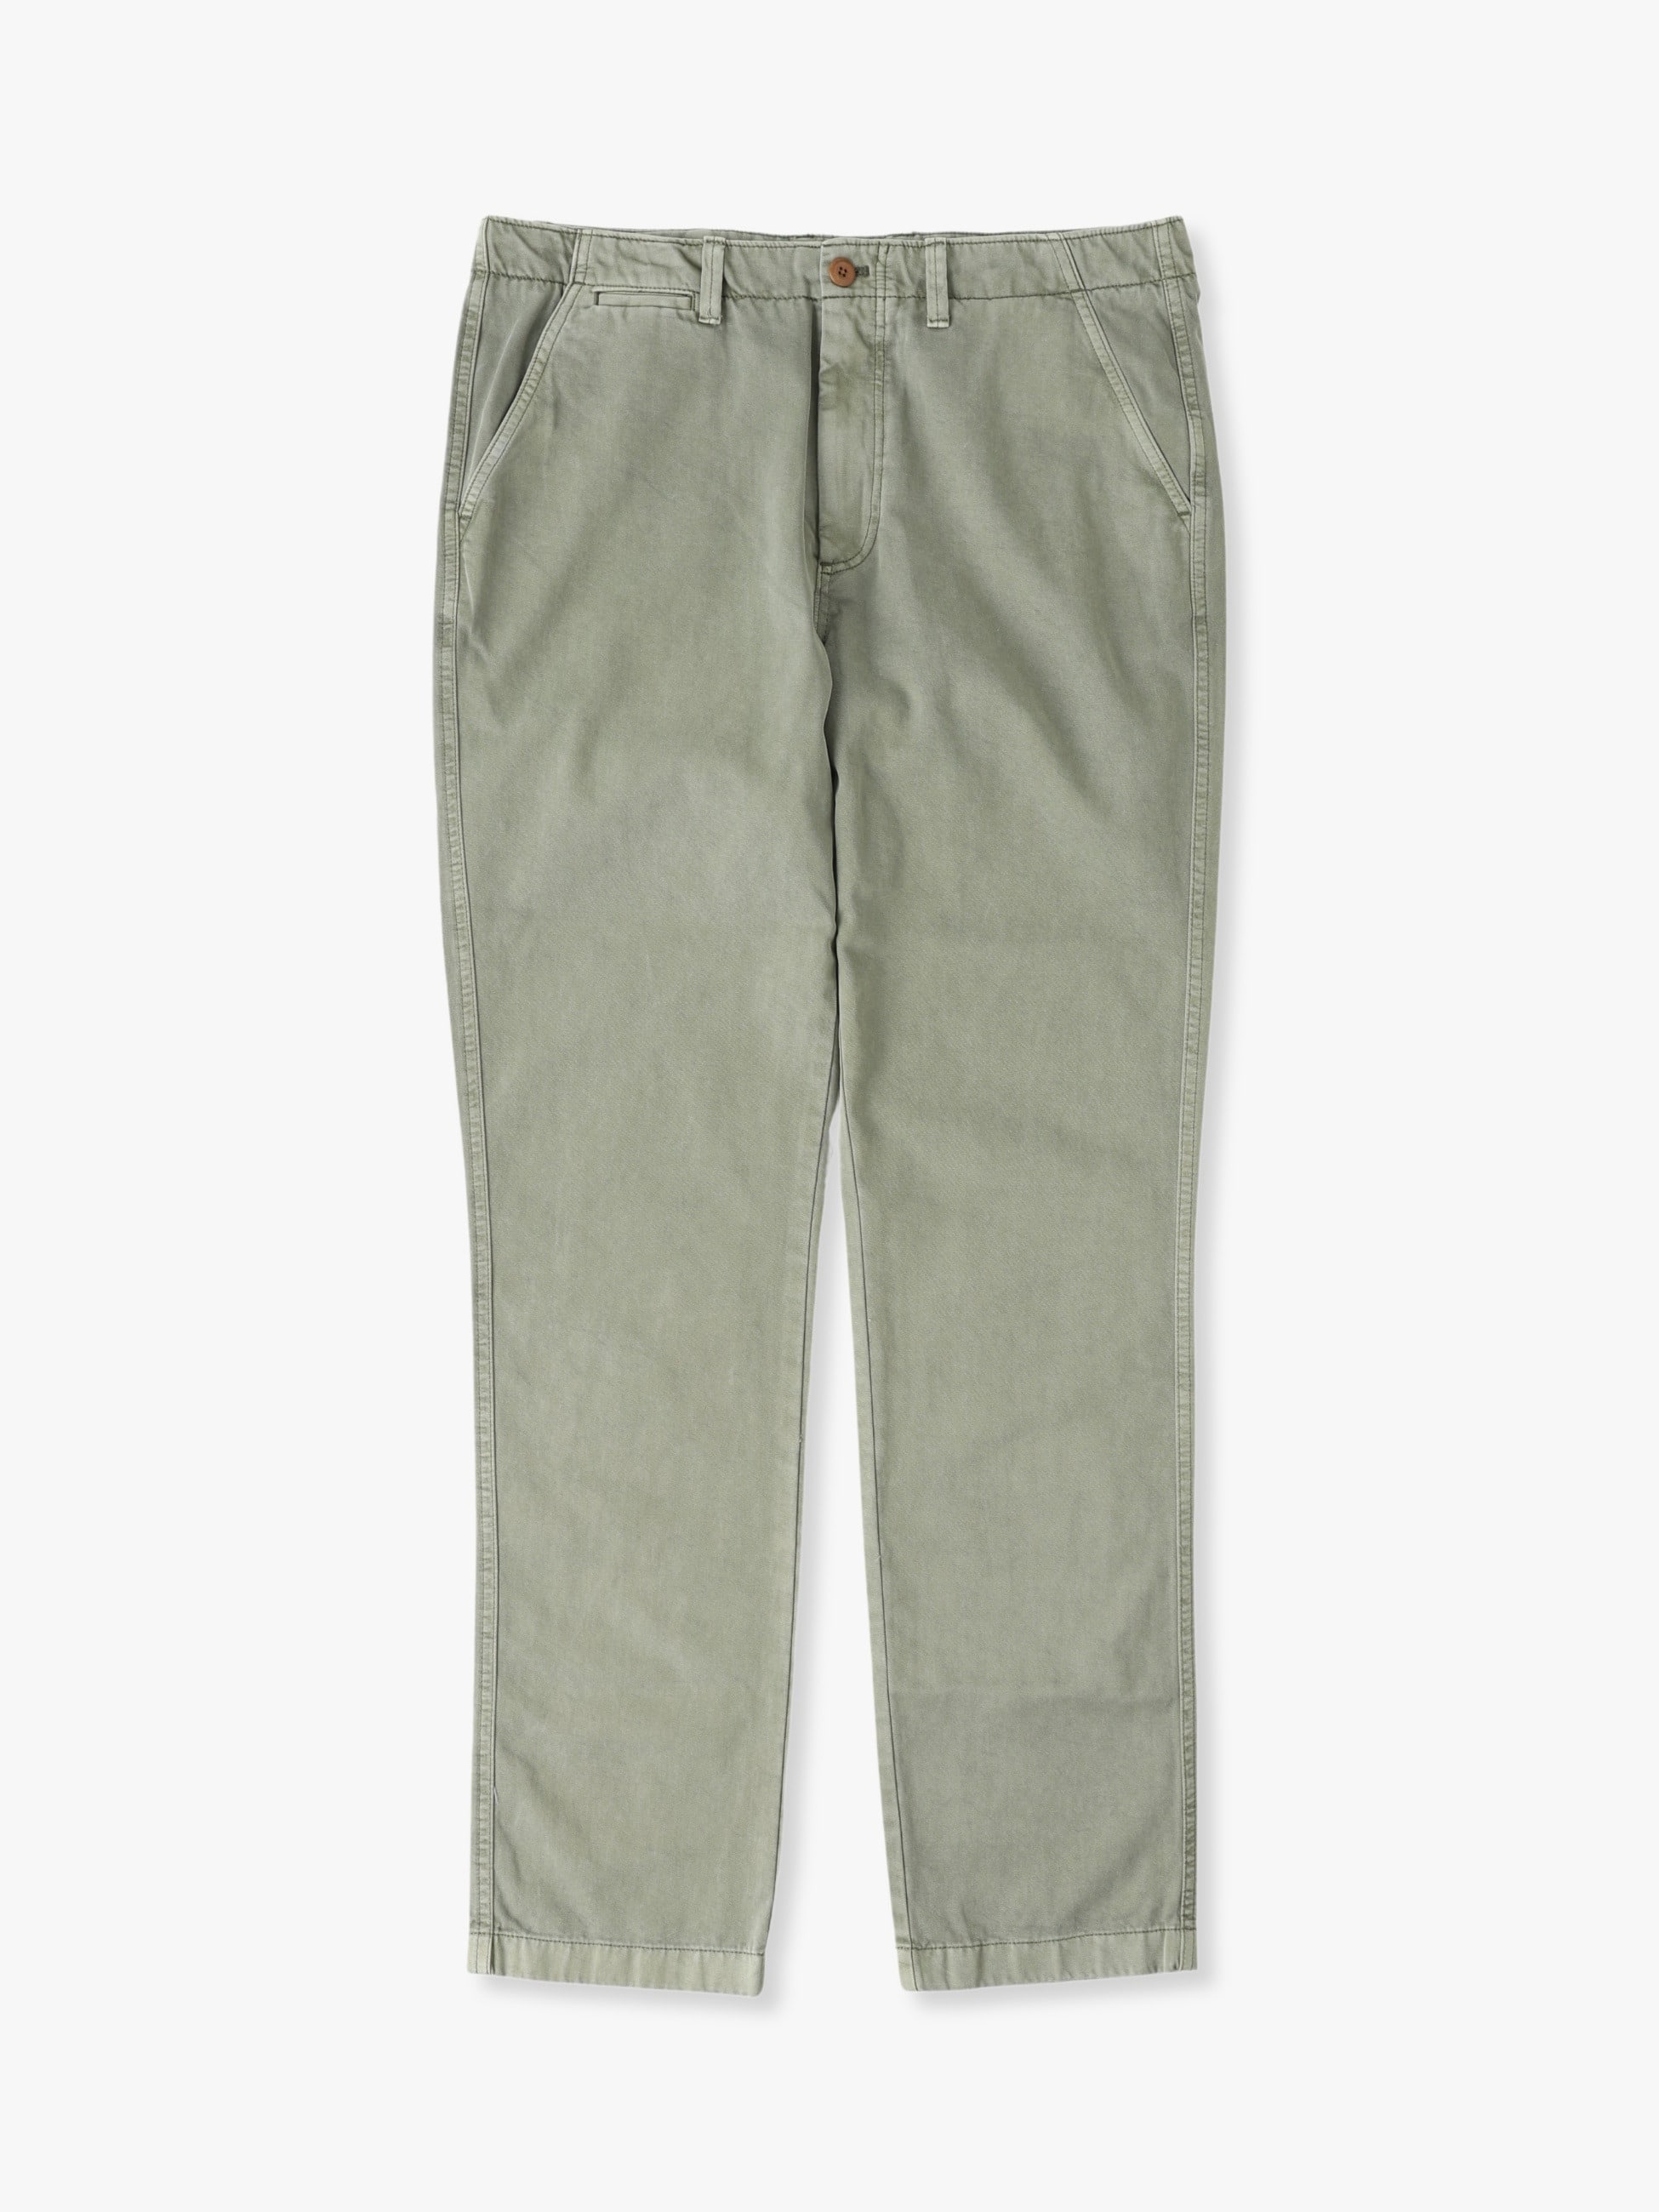 RH Vintage Organic Cotton Chino Trousers | camillevieraservices.com